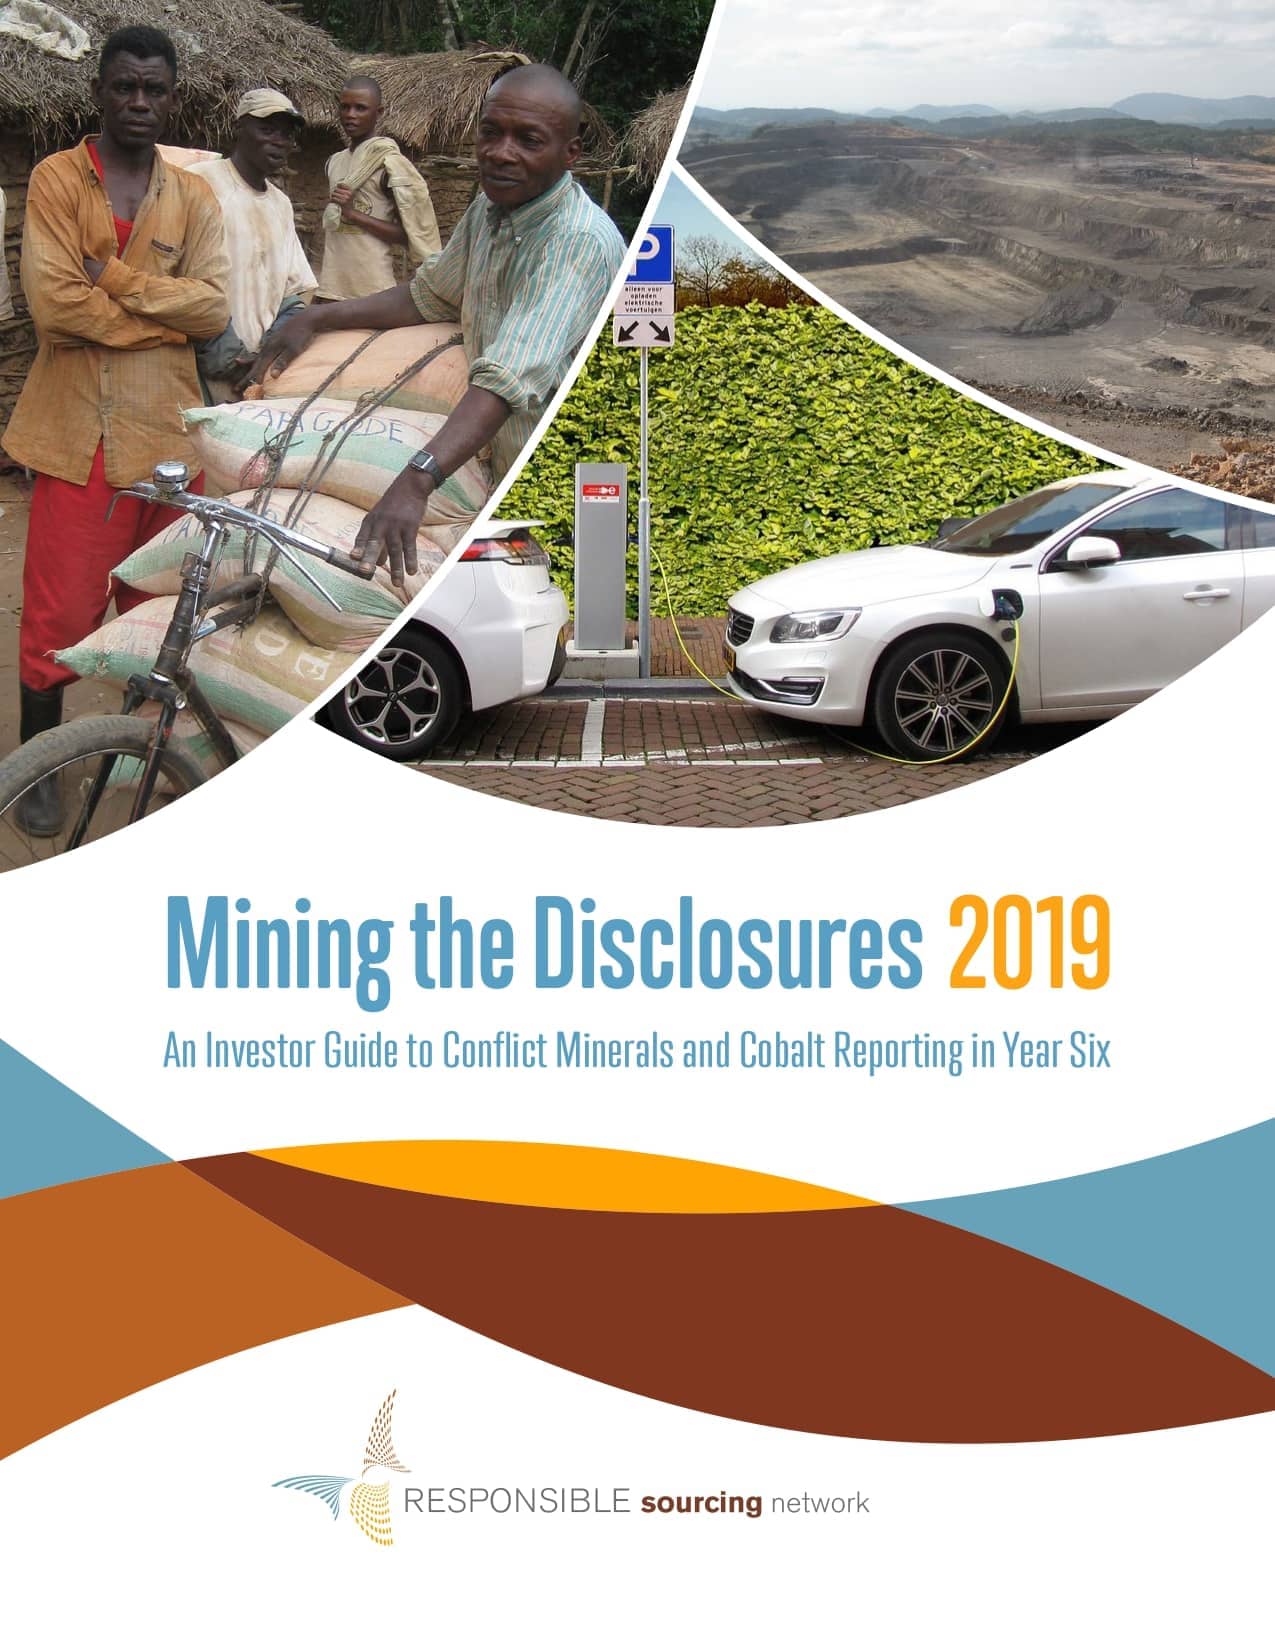 Mining the Disclosures 2019 - An Investor Guide to Conflict Minerals and Cobalt Reporting in Year Six